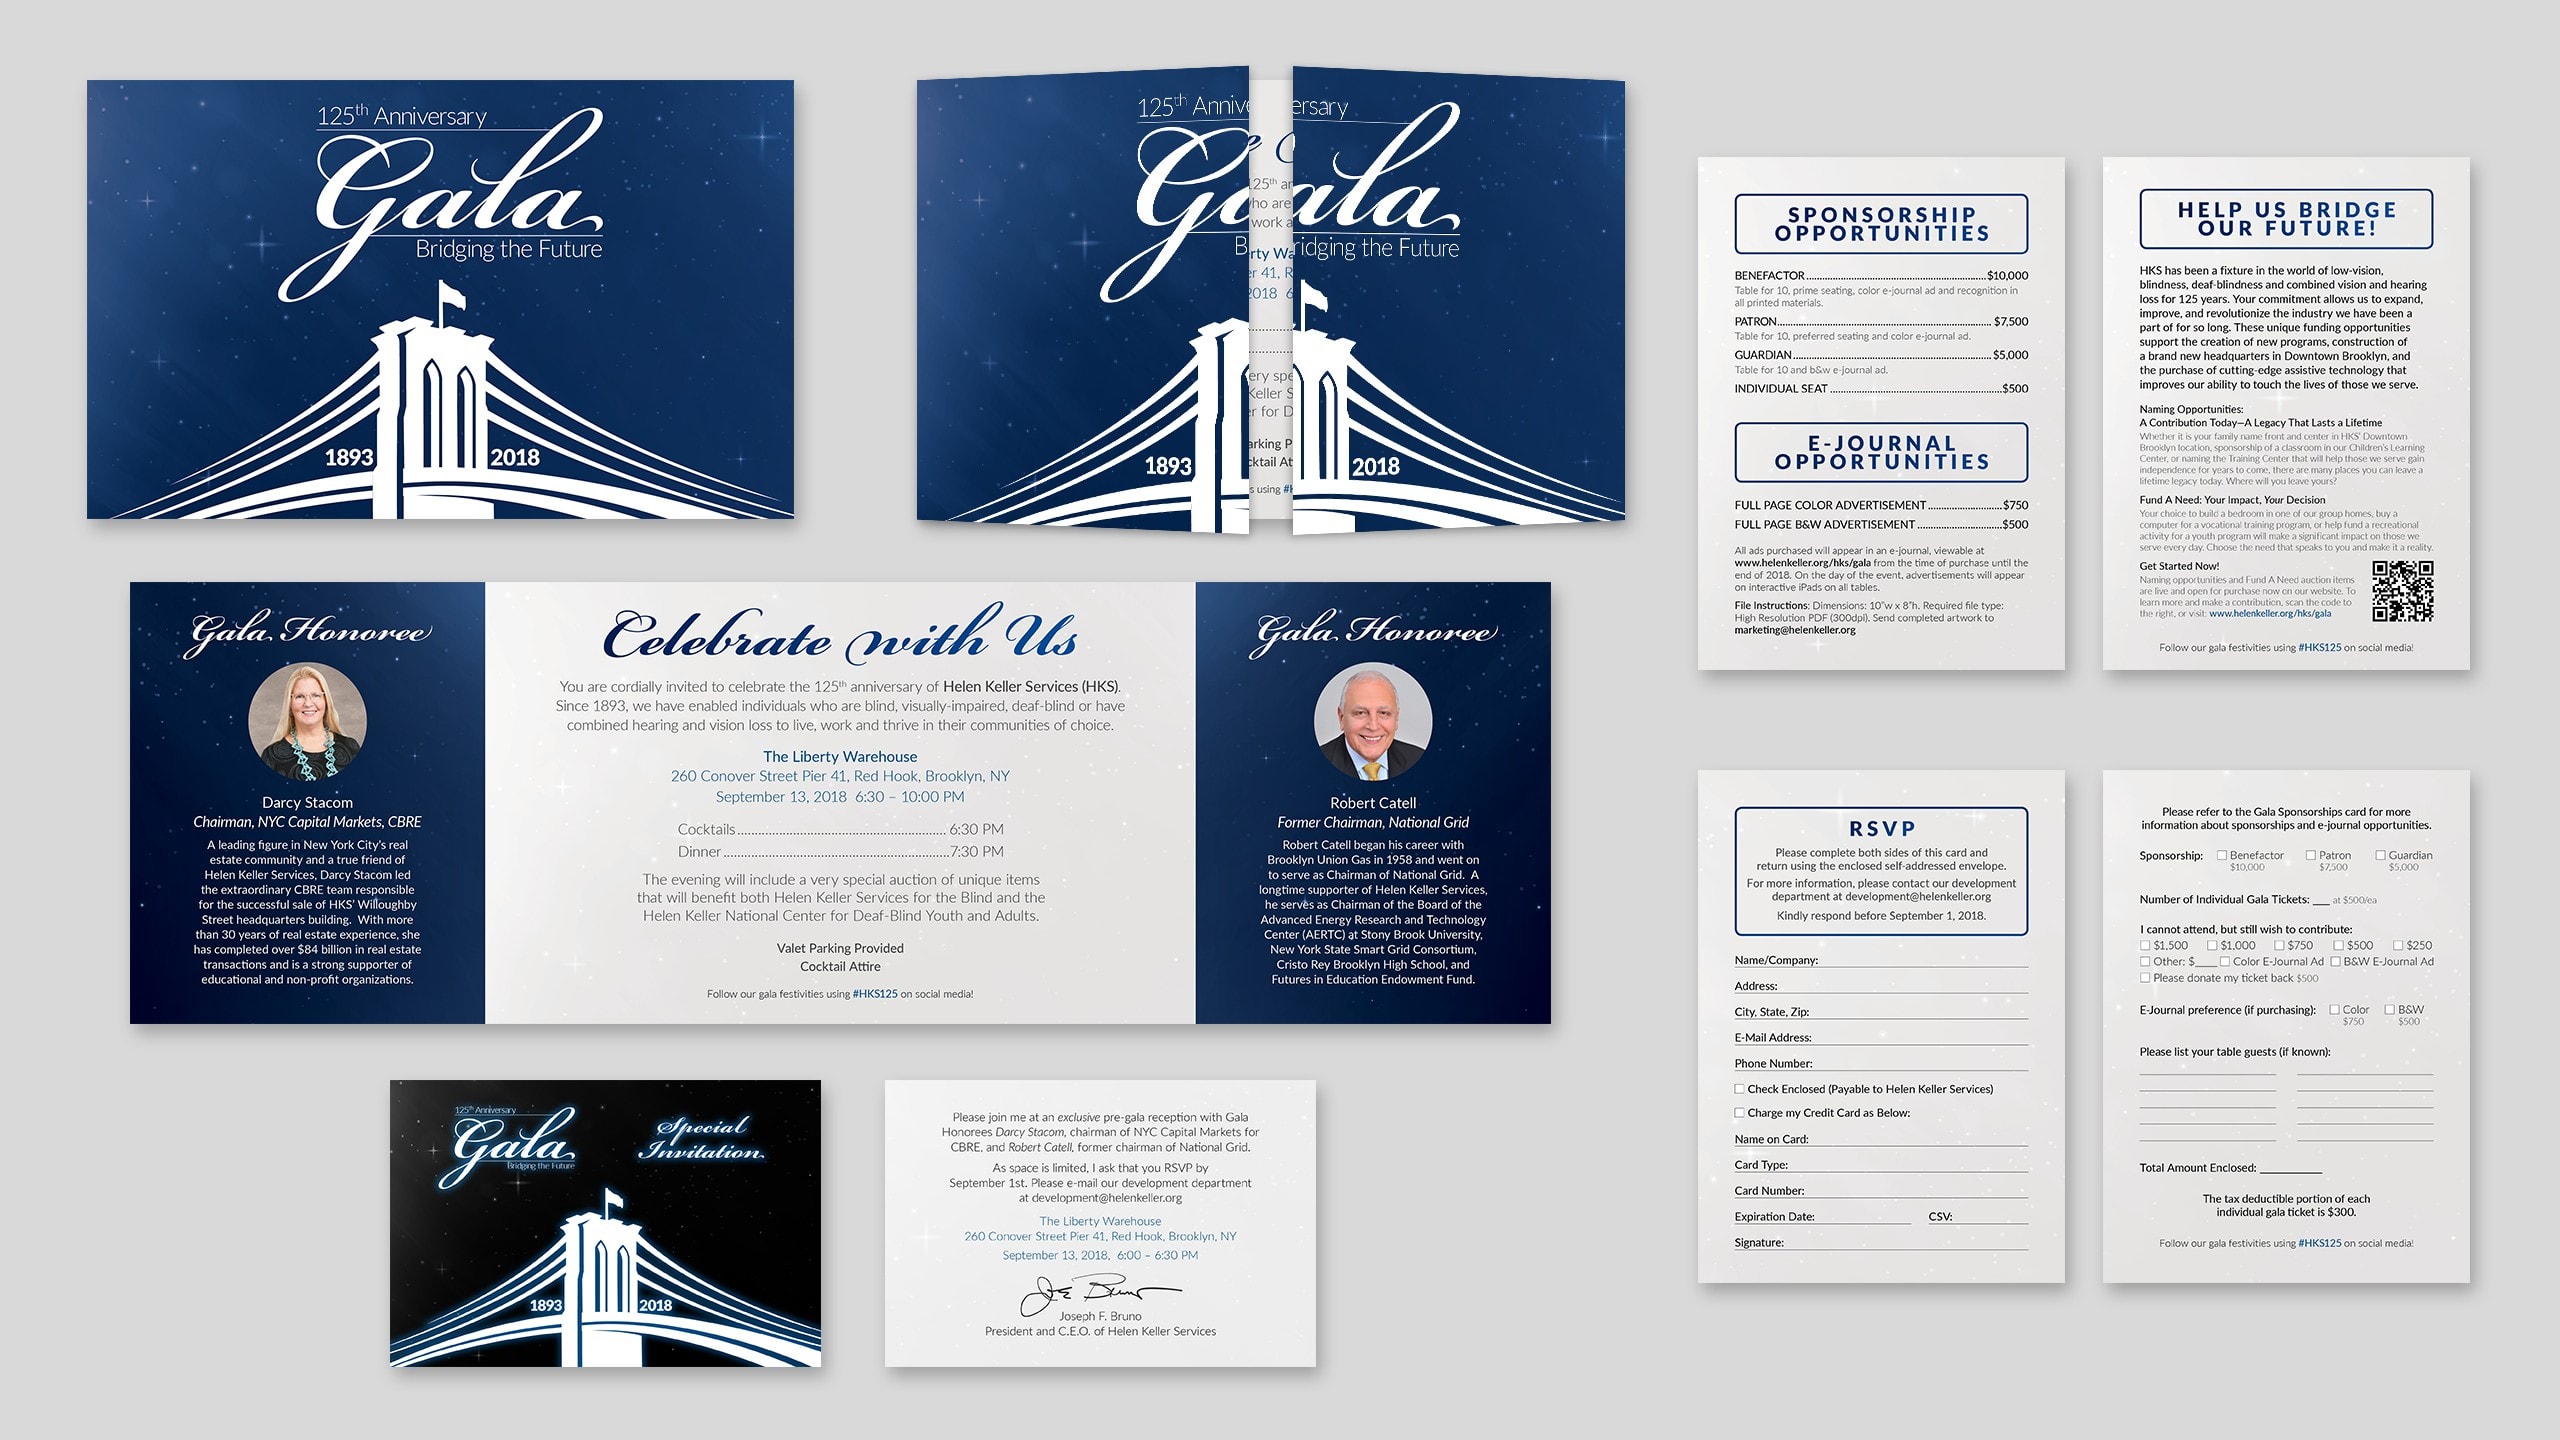 Graphics depict a 125th Anniversary Gala invitation package, including a double gate fold invitation, RSVP card, and VIP note card